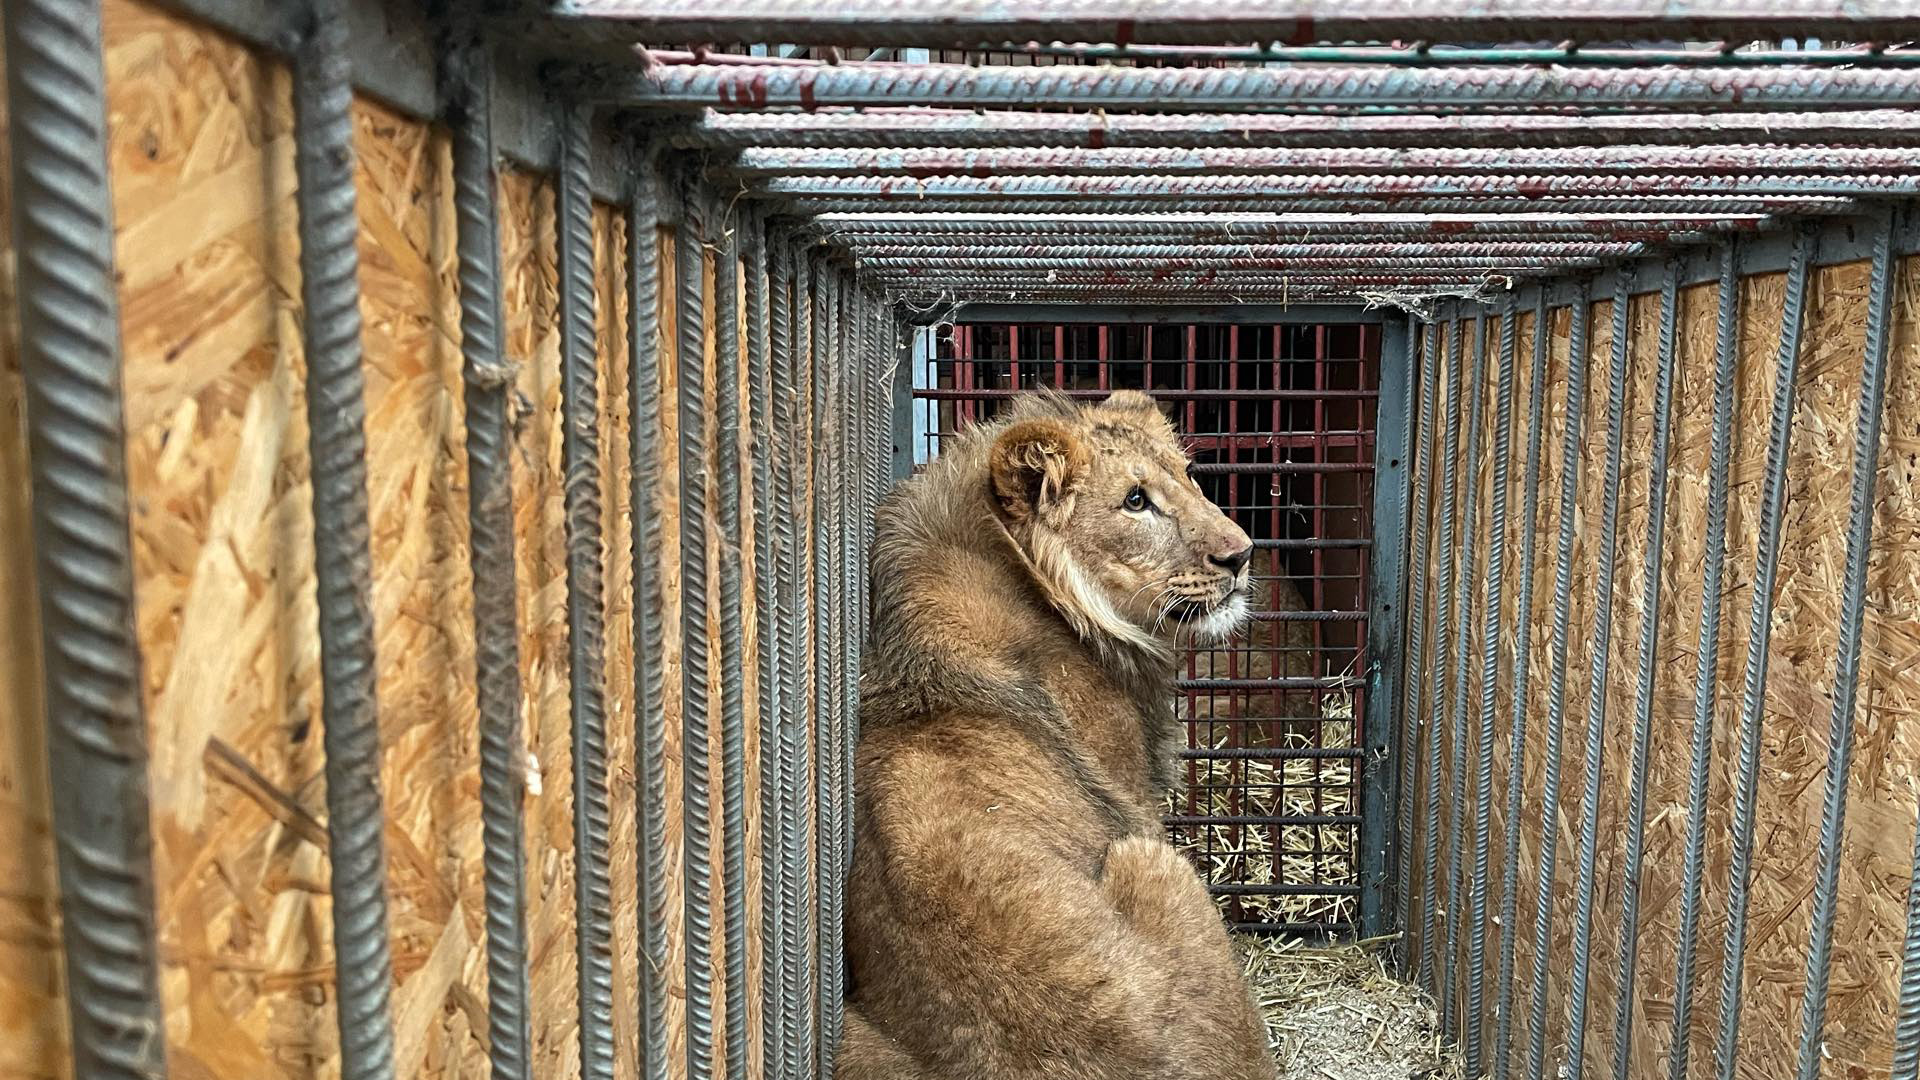 A male lions sits with his back against the wall in a small metal and wood crate